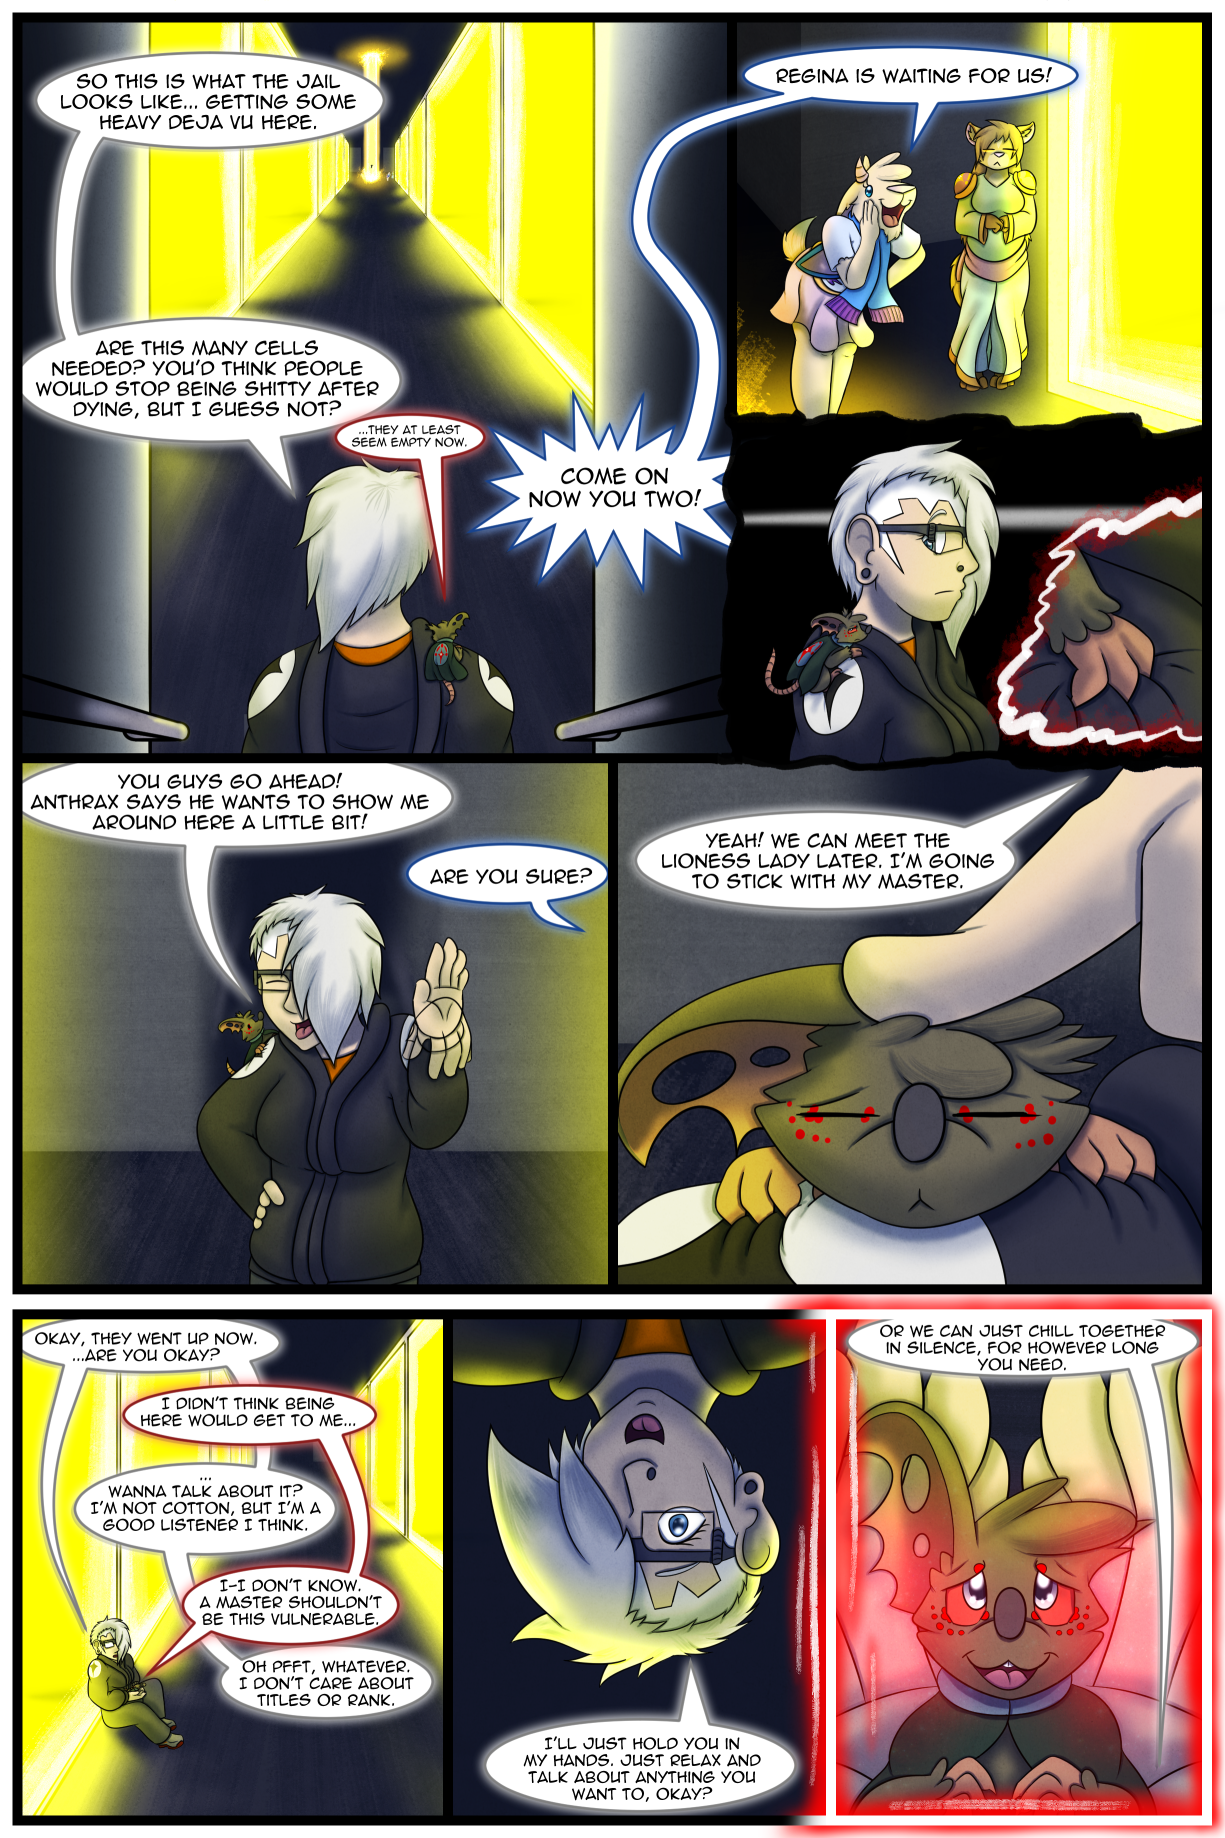 Ch6 Page 13 – Revisit